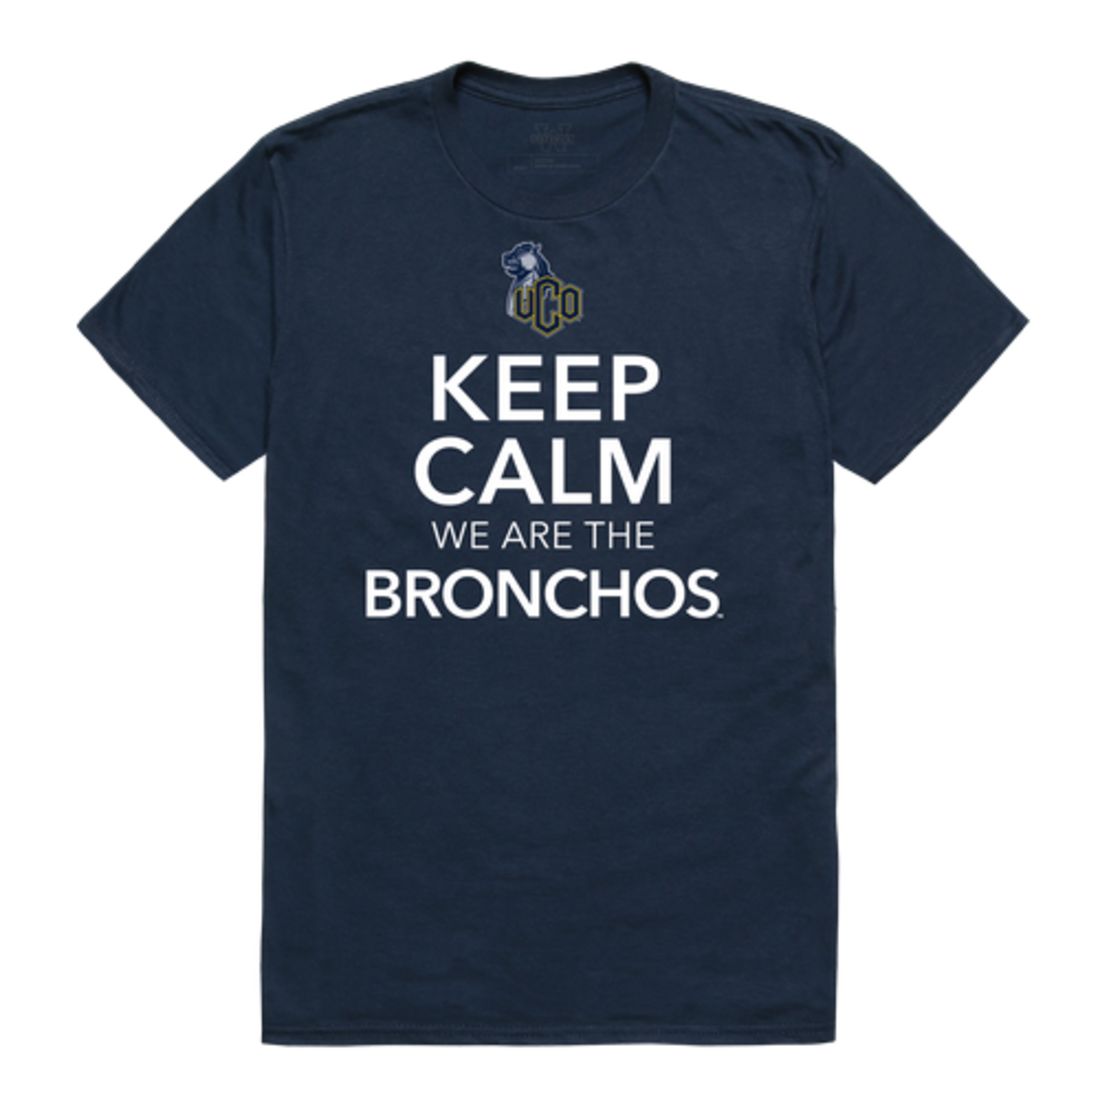 Keep Calm I'm From University of Central Oklahoma Bronchos T-Shirt Tee